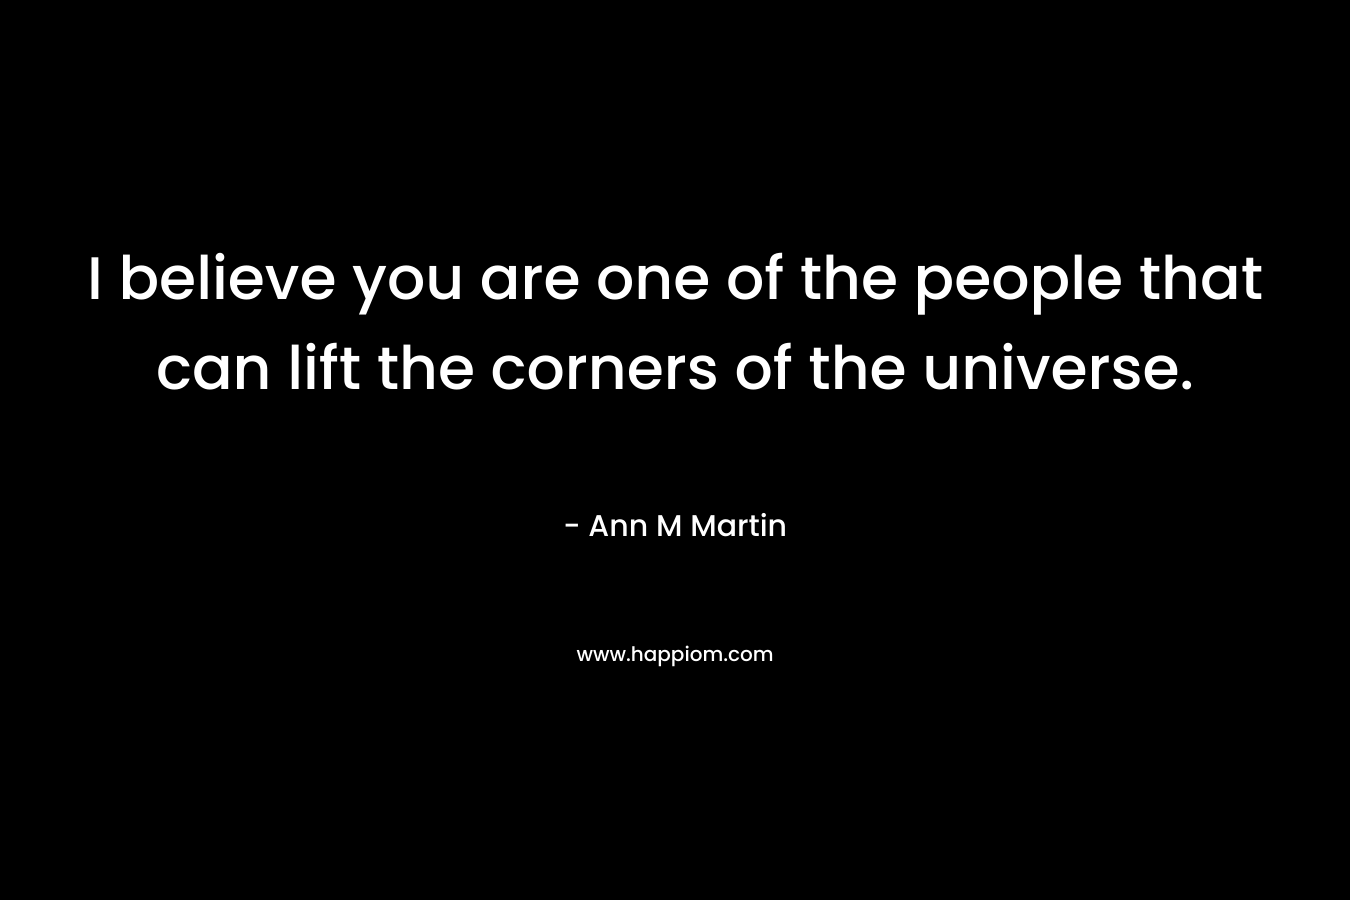 I believe you are one of the people that can lift the corners of the universe. – Ann M Martin